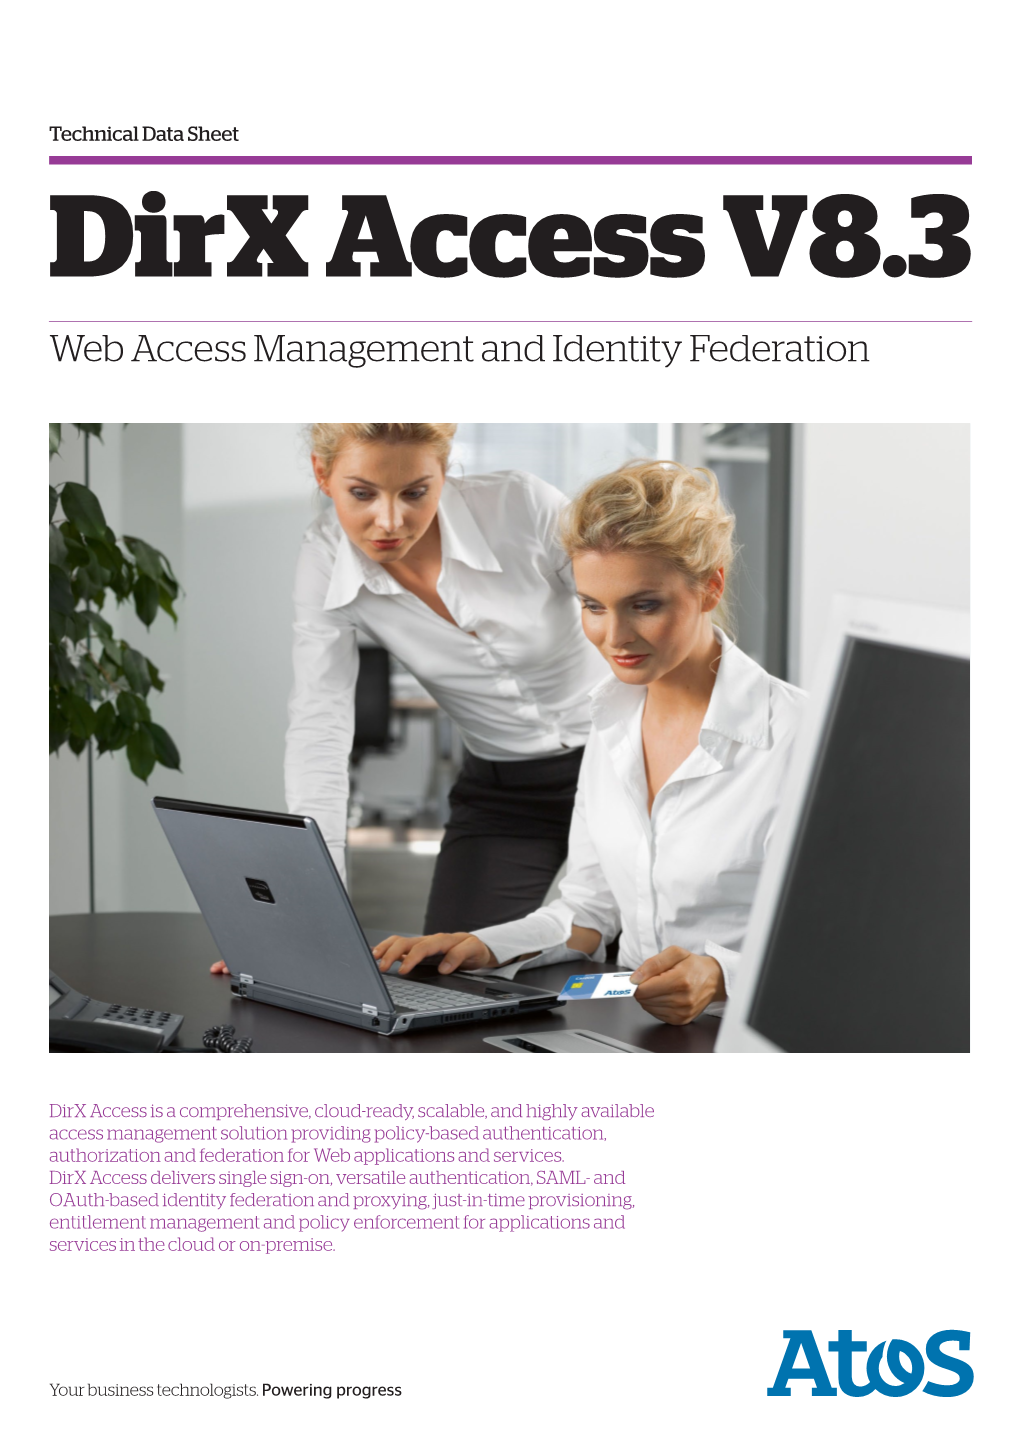 Technical Data Sheet Dirx Access V8.3 Web Access Management and Identity Federation